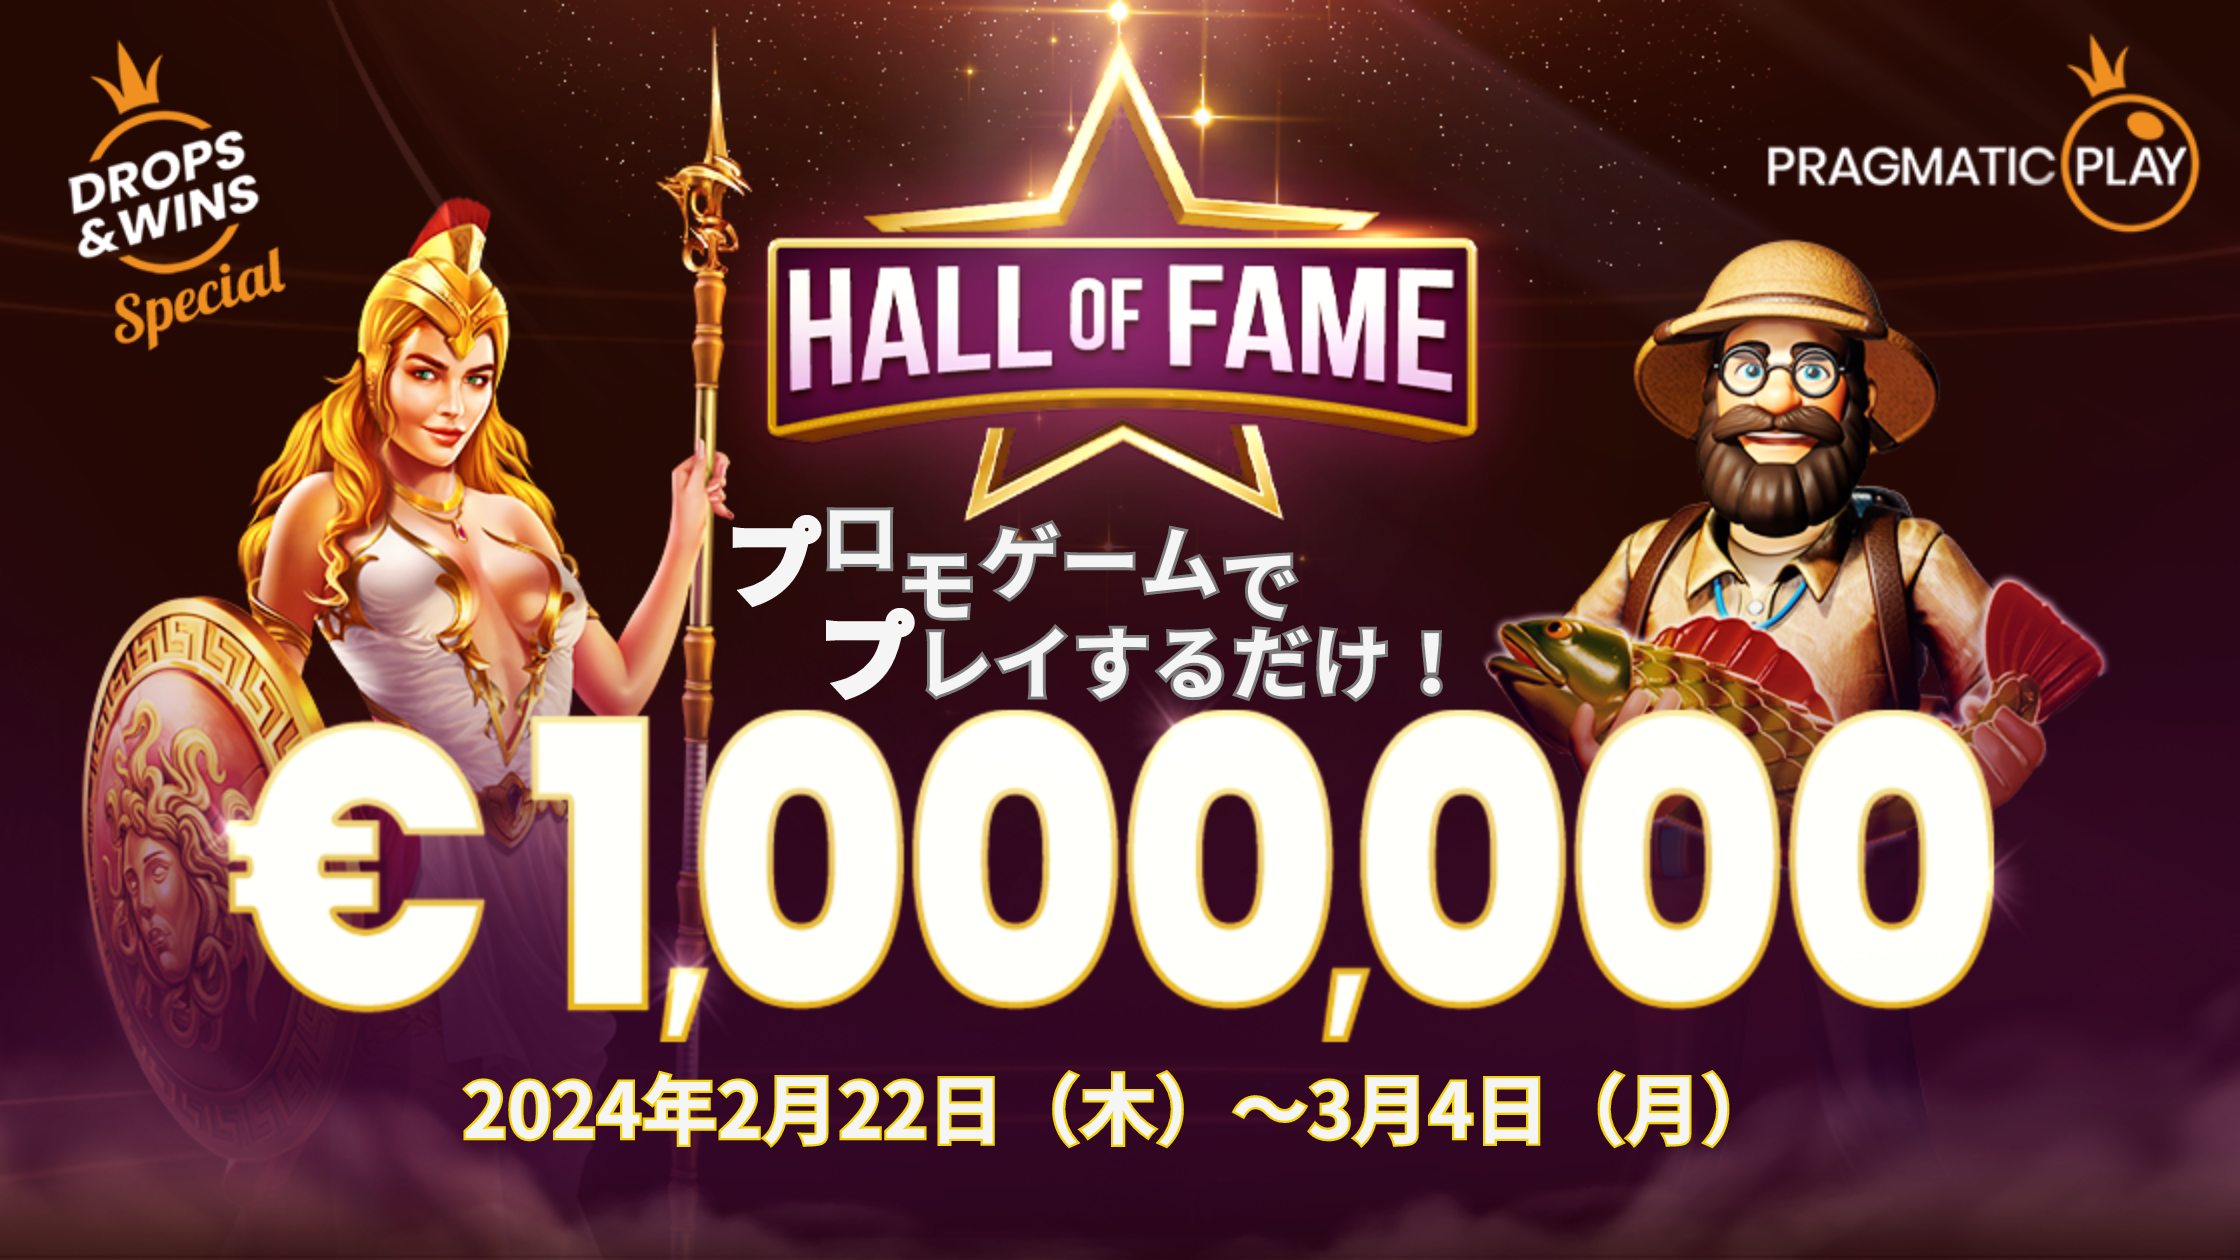 Featured image for “【プロモ】Hall of Fame　プライズ総額　€1,000,000”